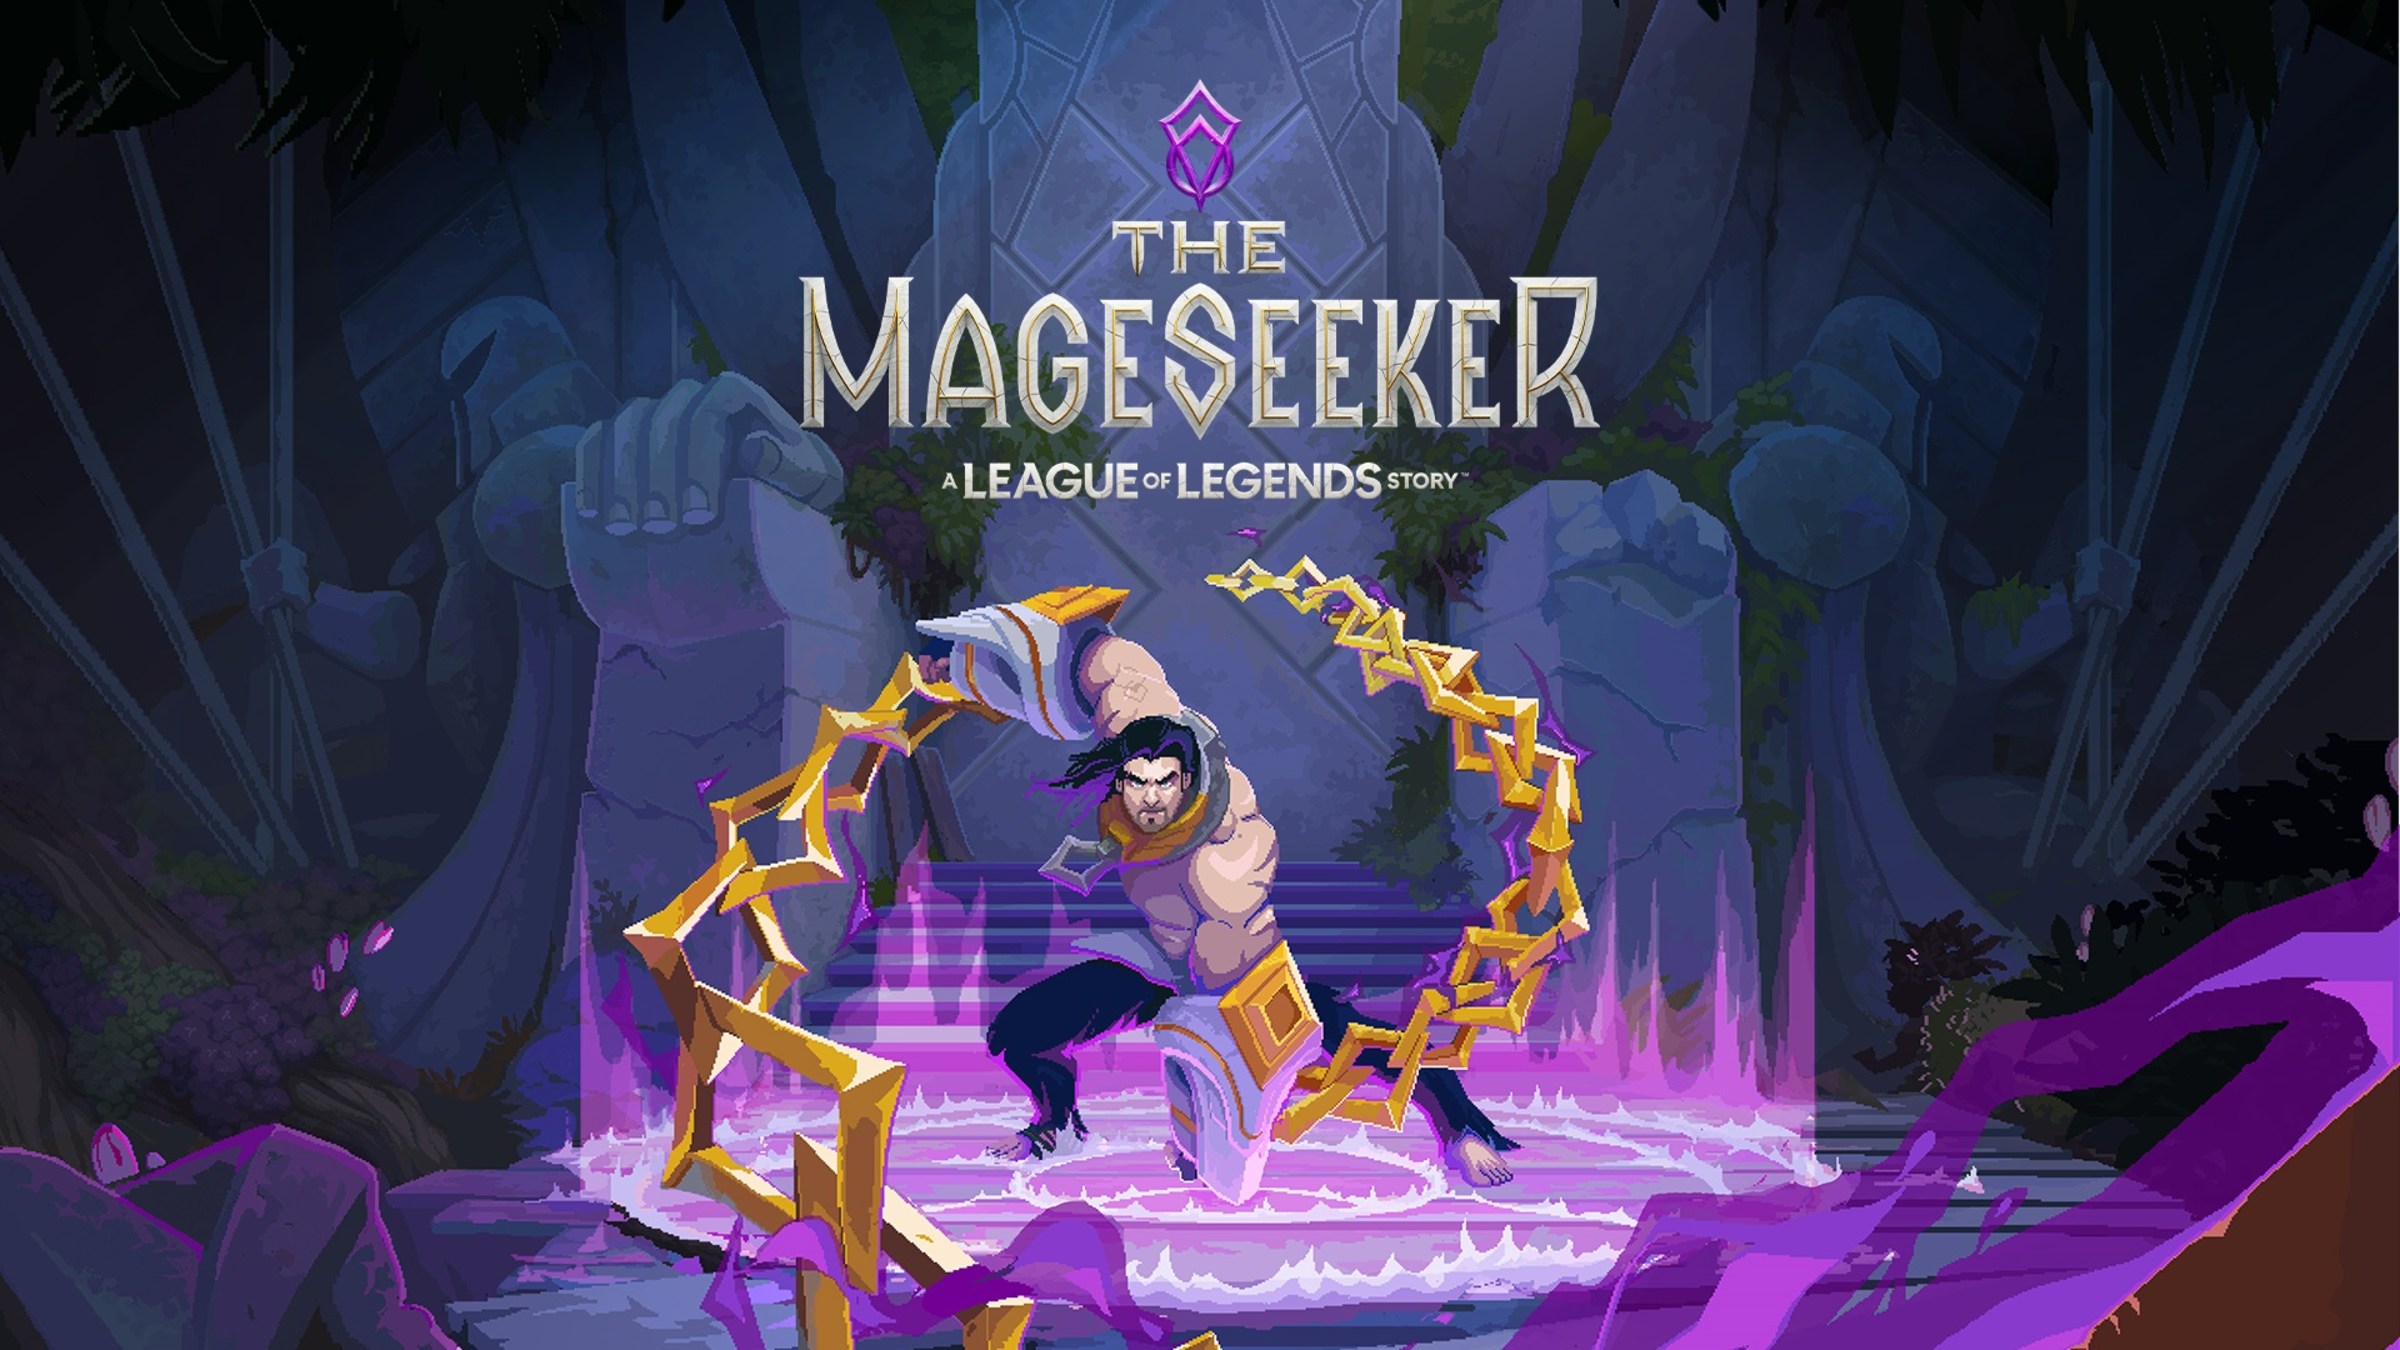 The Mageseeker: A League of Legends Story™ - Deluxe Edition for Nintendo  Switch - Nintendo Official Site